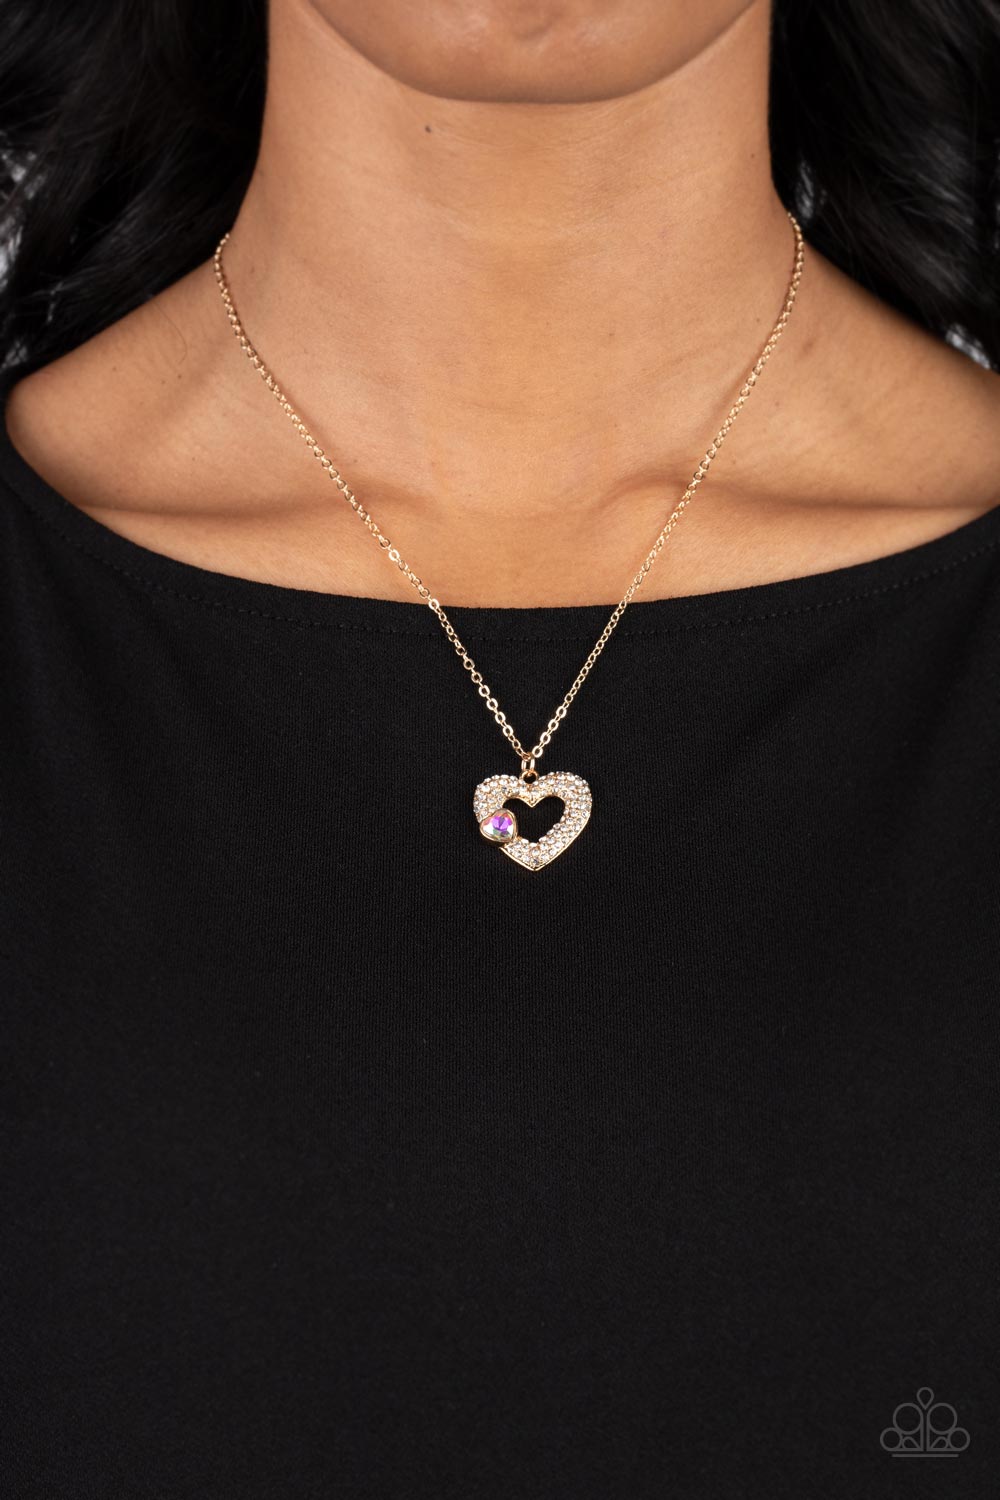 Paparazzi Accessories Bedazzled Bliss - Multi A luxurious airy gold heart lush with glassy white rhinestones swings from a classic gold chain. A faceted heart gem brushed in an iridescent shimmer graces one side of the larger bedazzled heart for a romanti